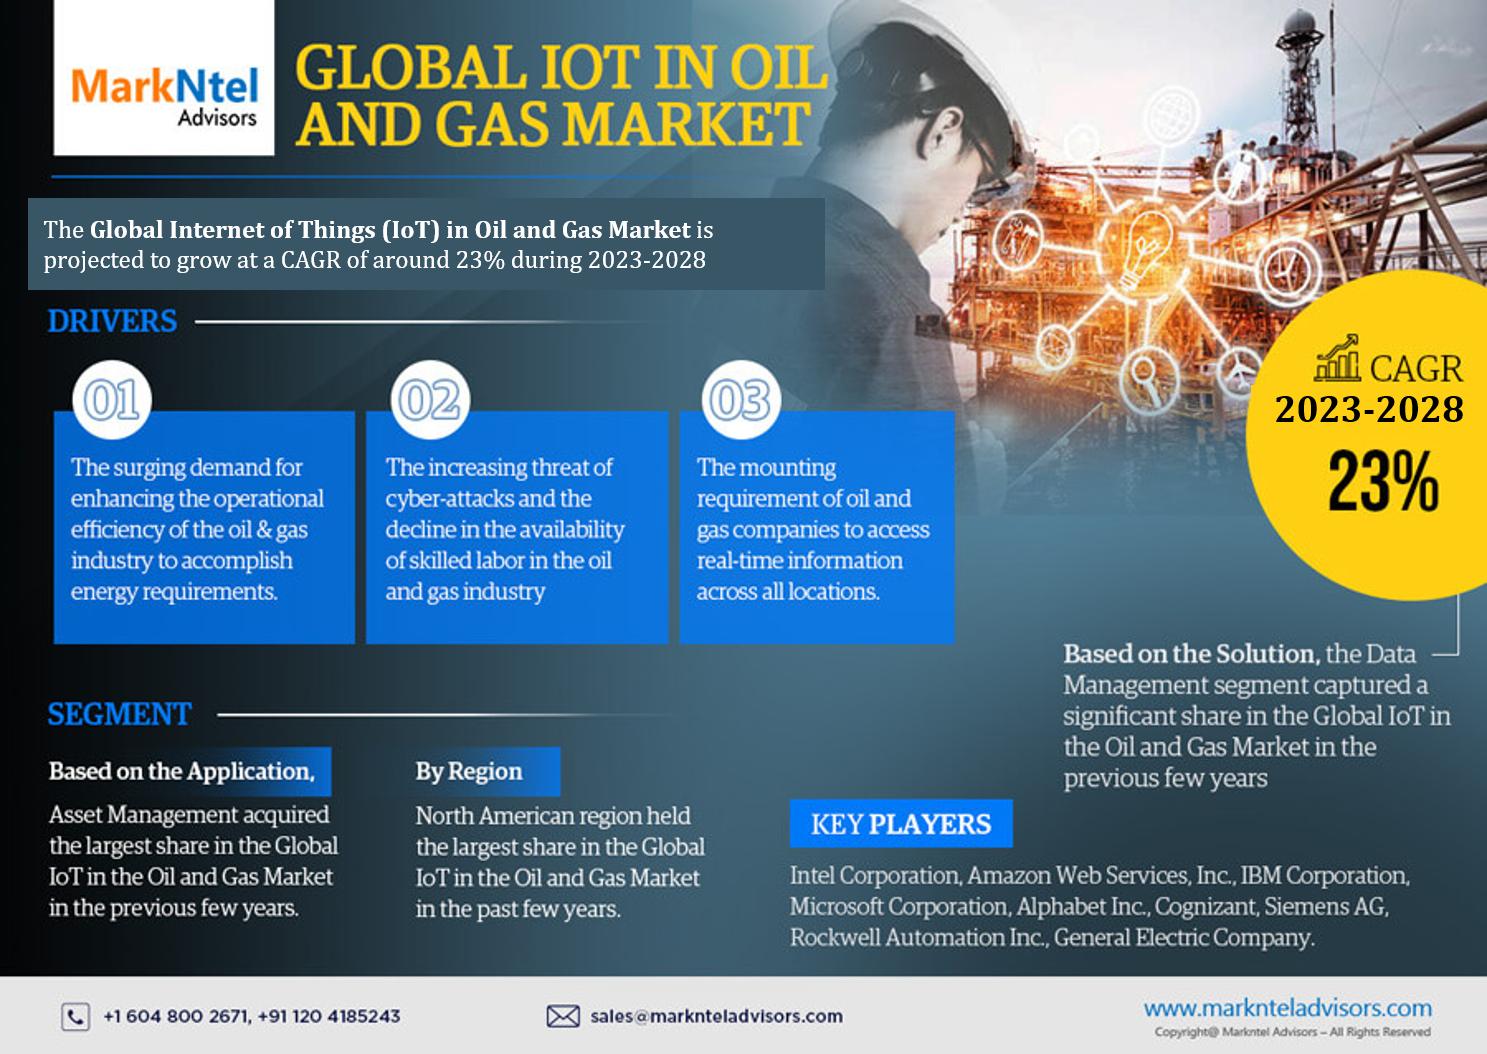 Global Internet of Things (IoT) in Oil and Gas Market